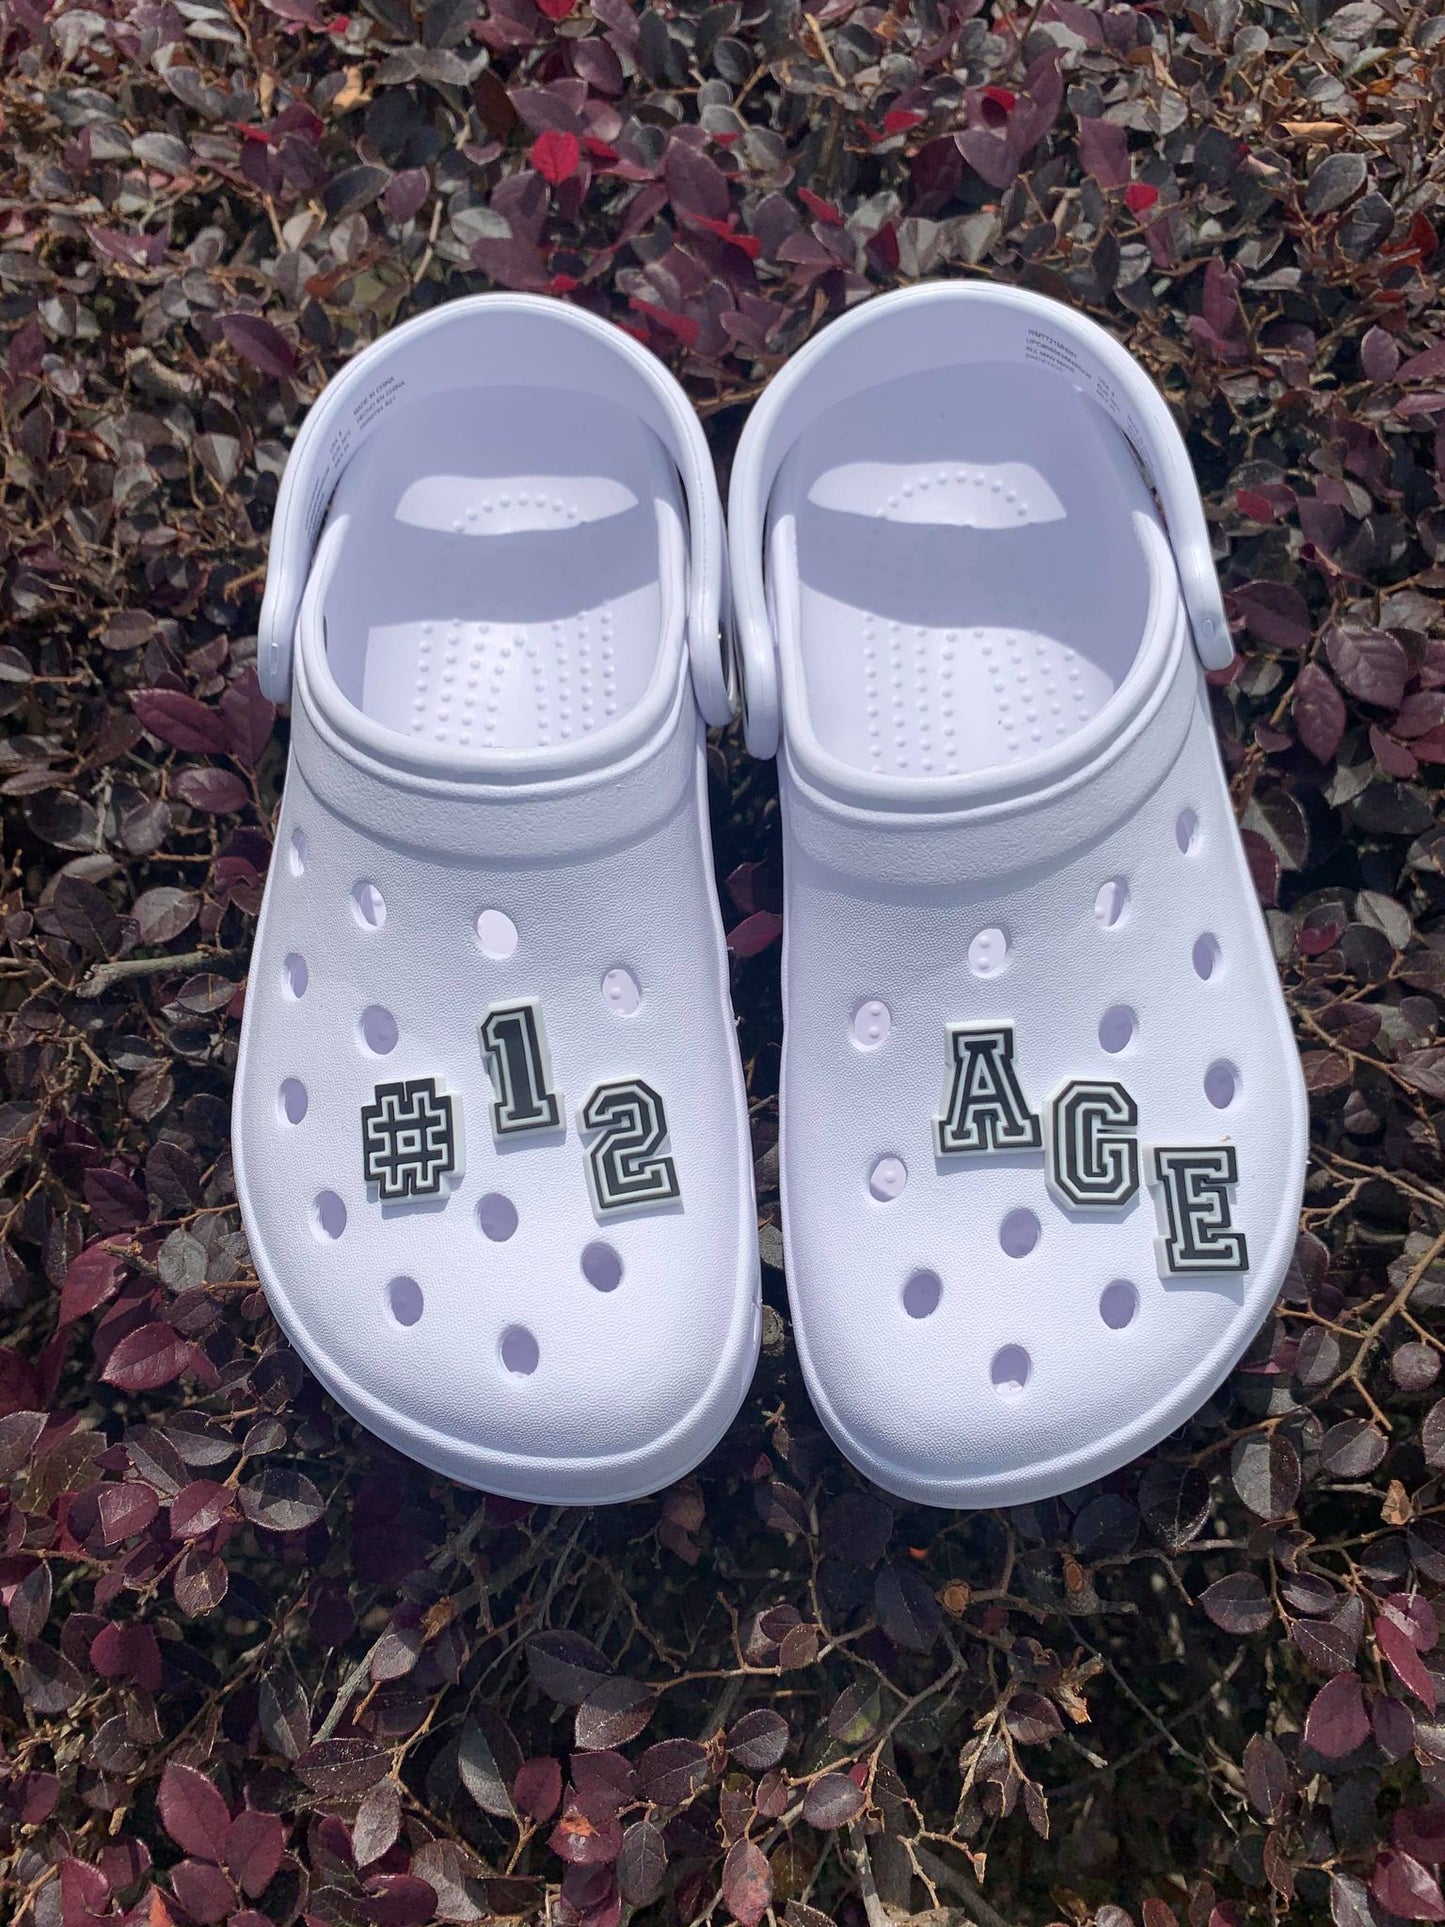  Crocs: Letters & Numbers